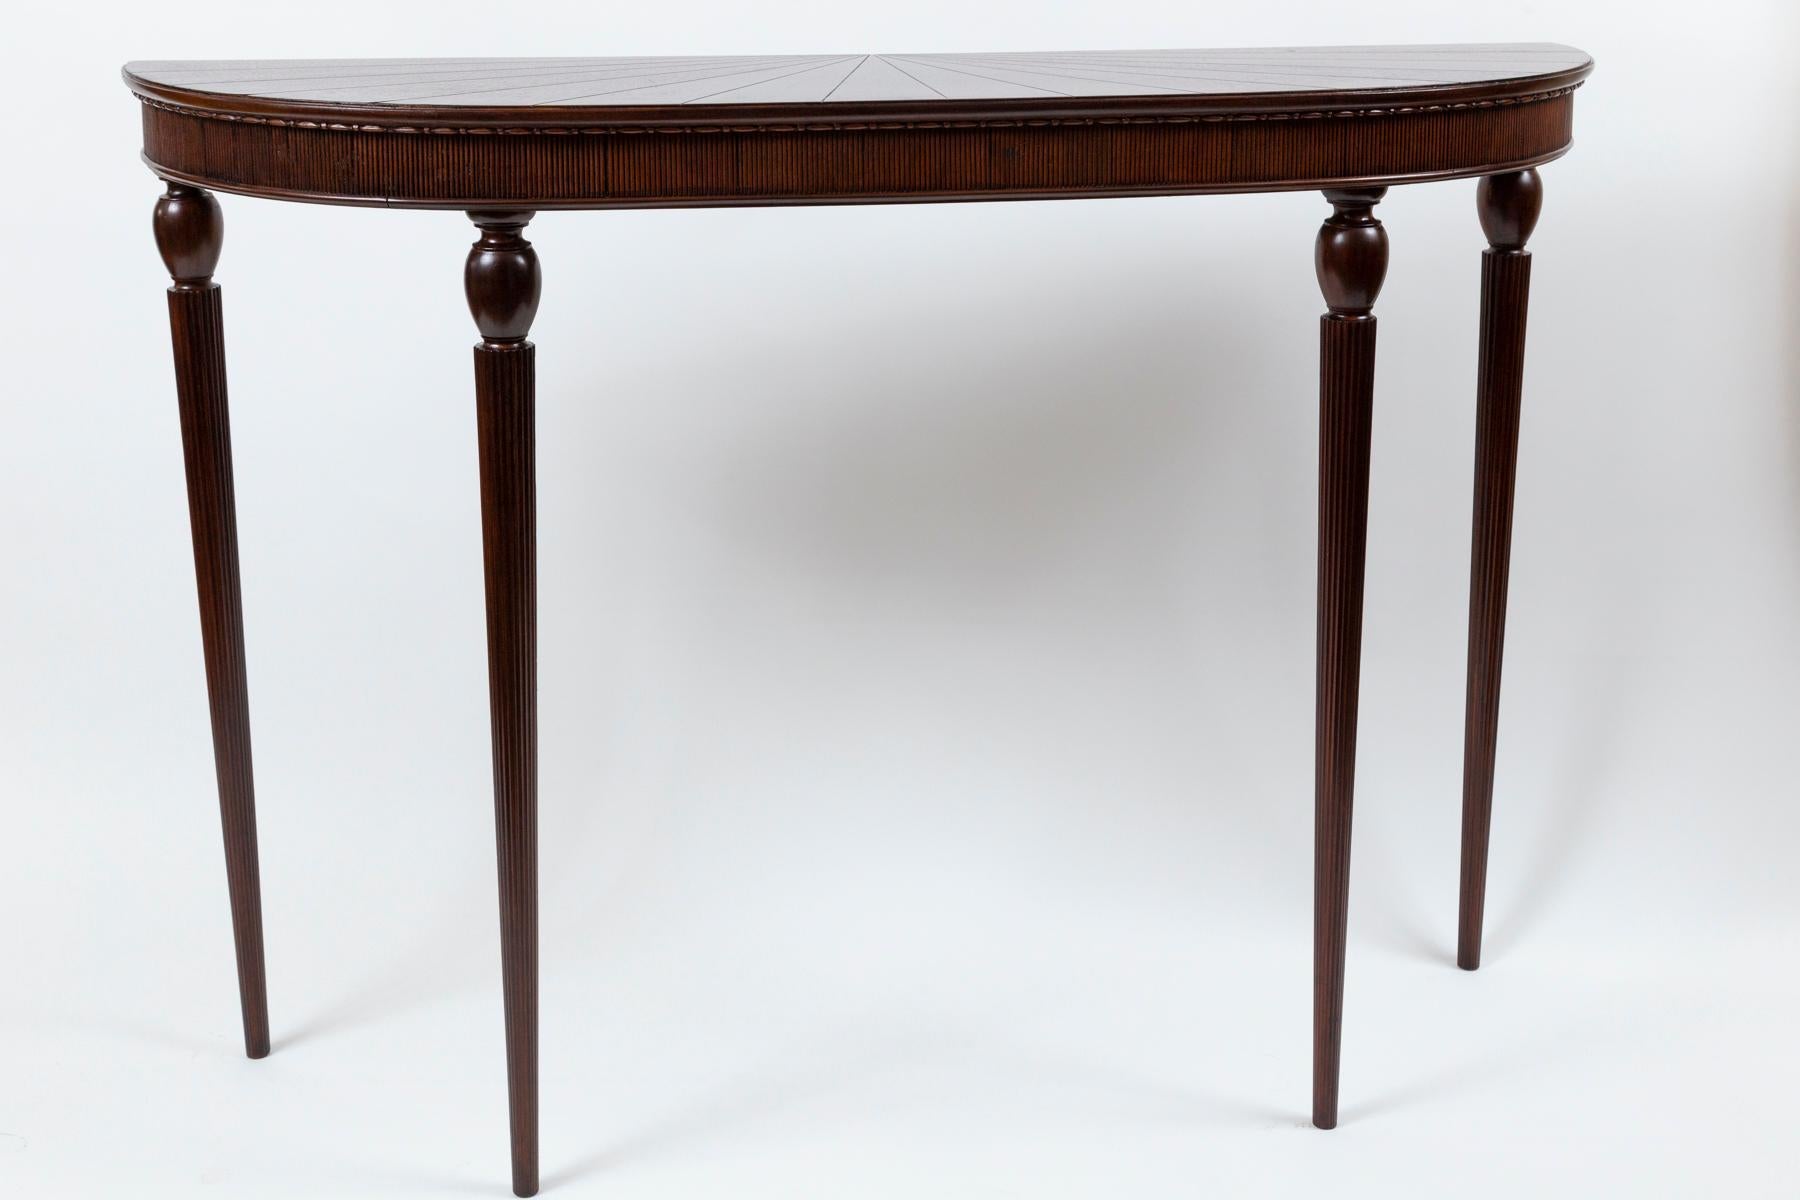 Elegantly proportioned Italian walnut d-shaped console with reeded apron finishing on four high turned and reeded legs.
Attributed to Paolo Buffa’s earlier pieces where he modifies classical forms with his modern sense of scale 
Origin: